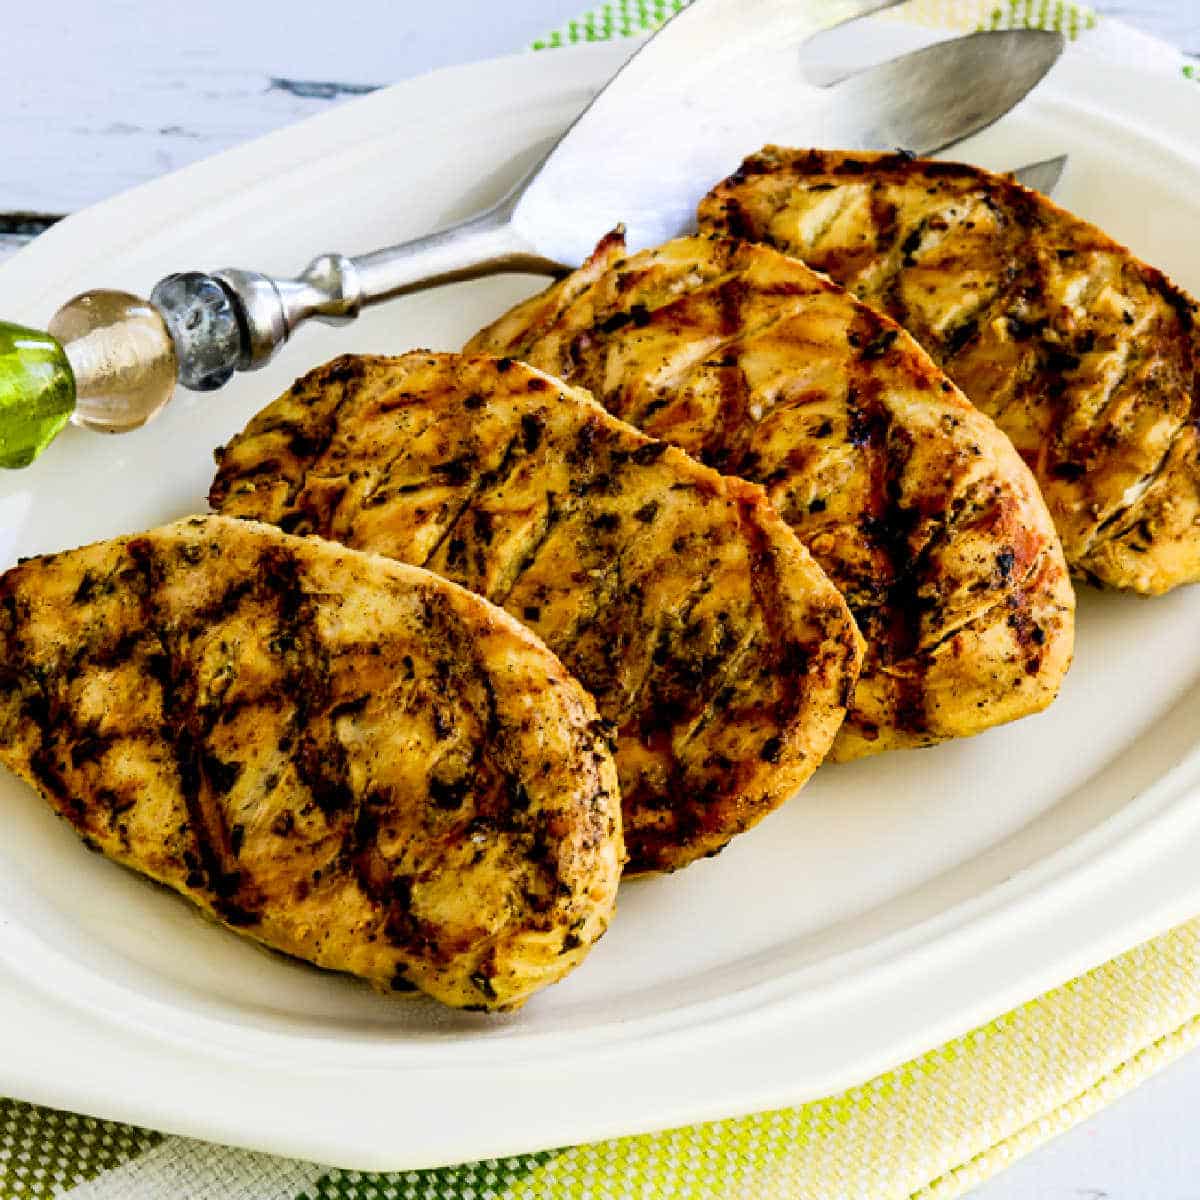 Square image of Grilled Tarragon Mustard Chicken shown on serving plater.